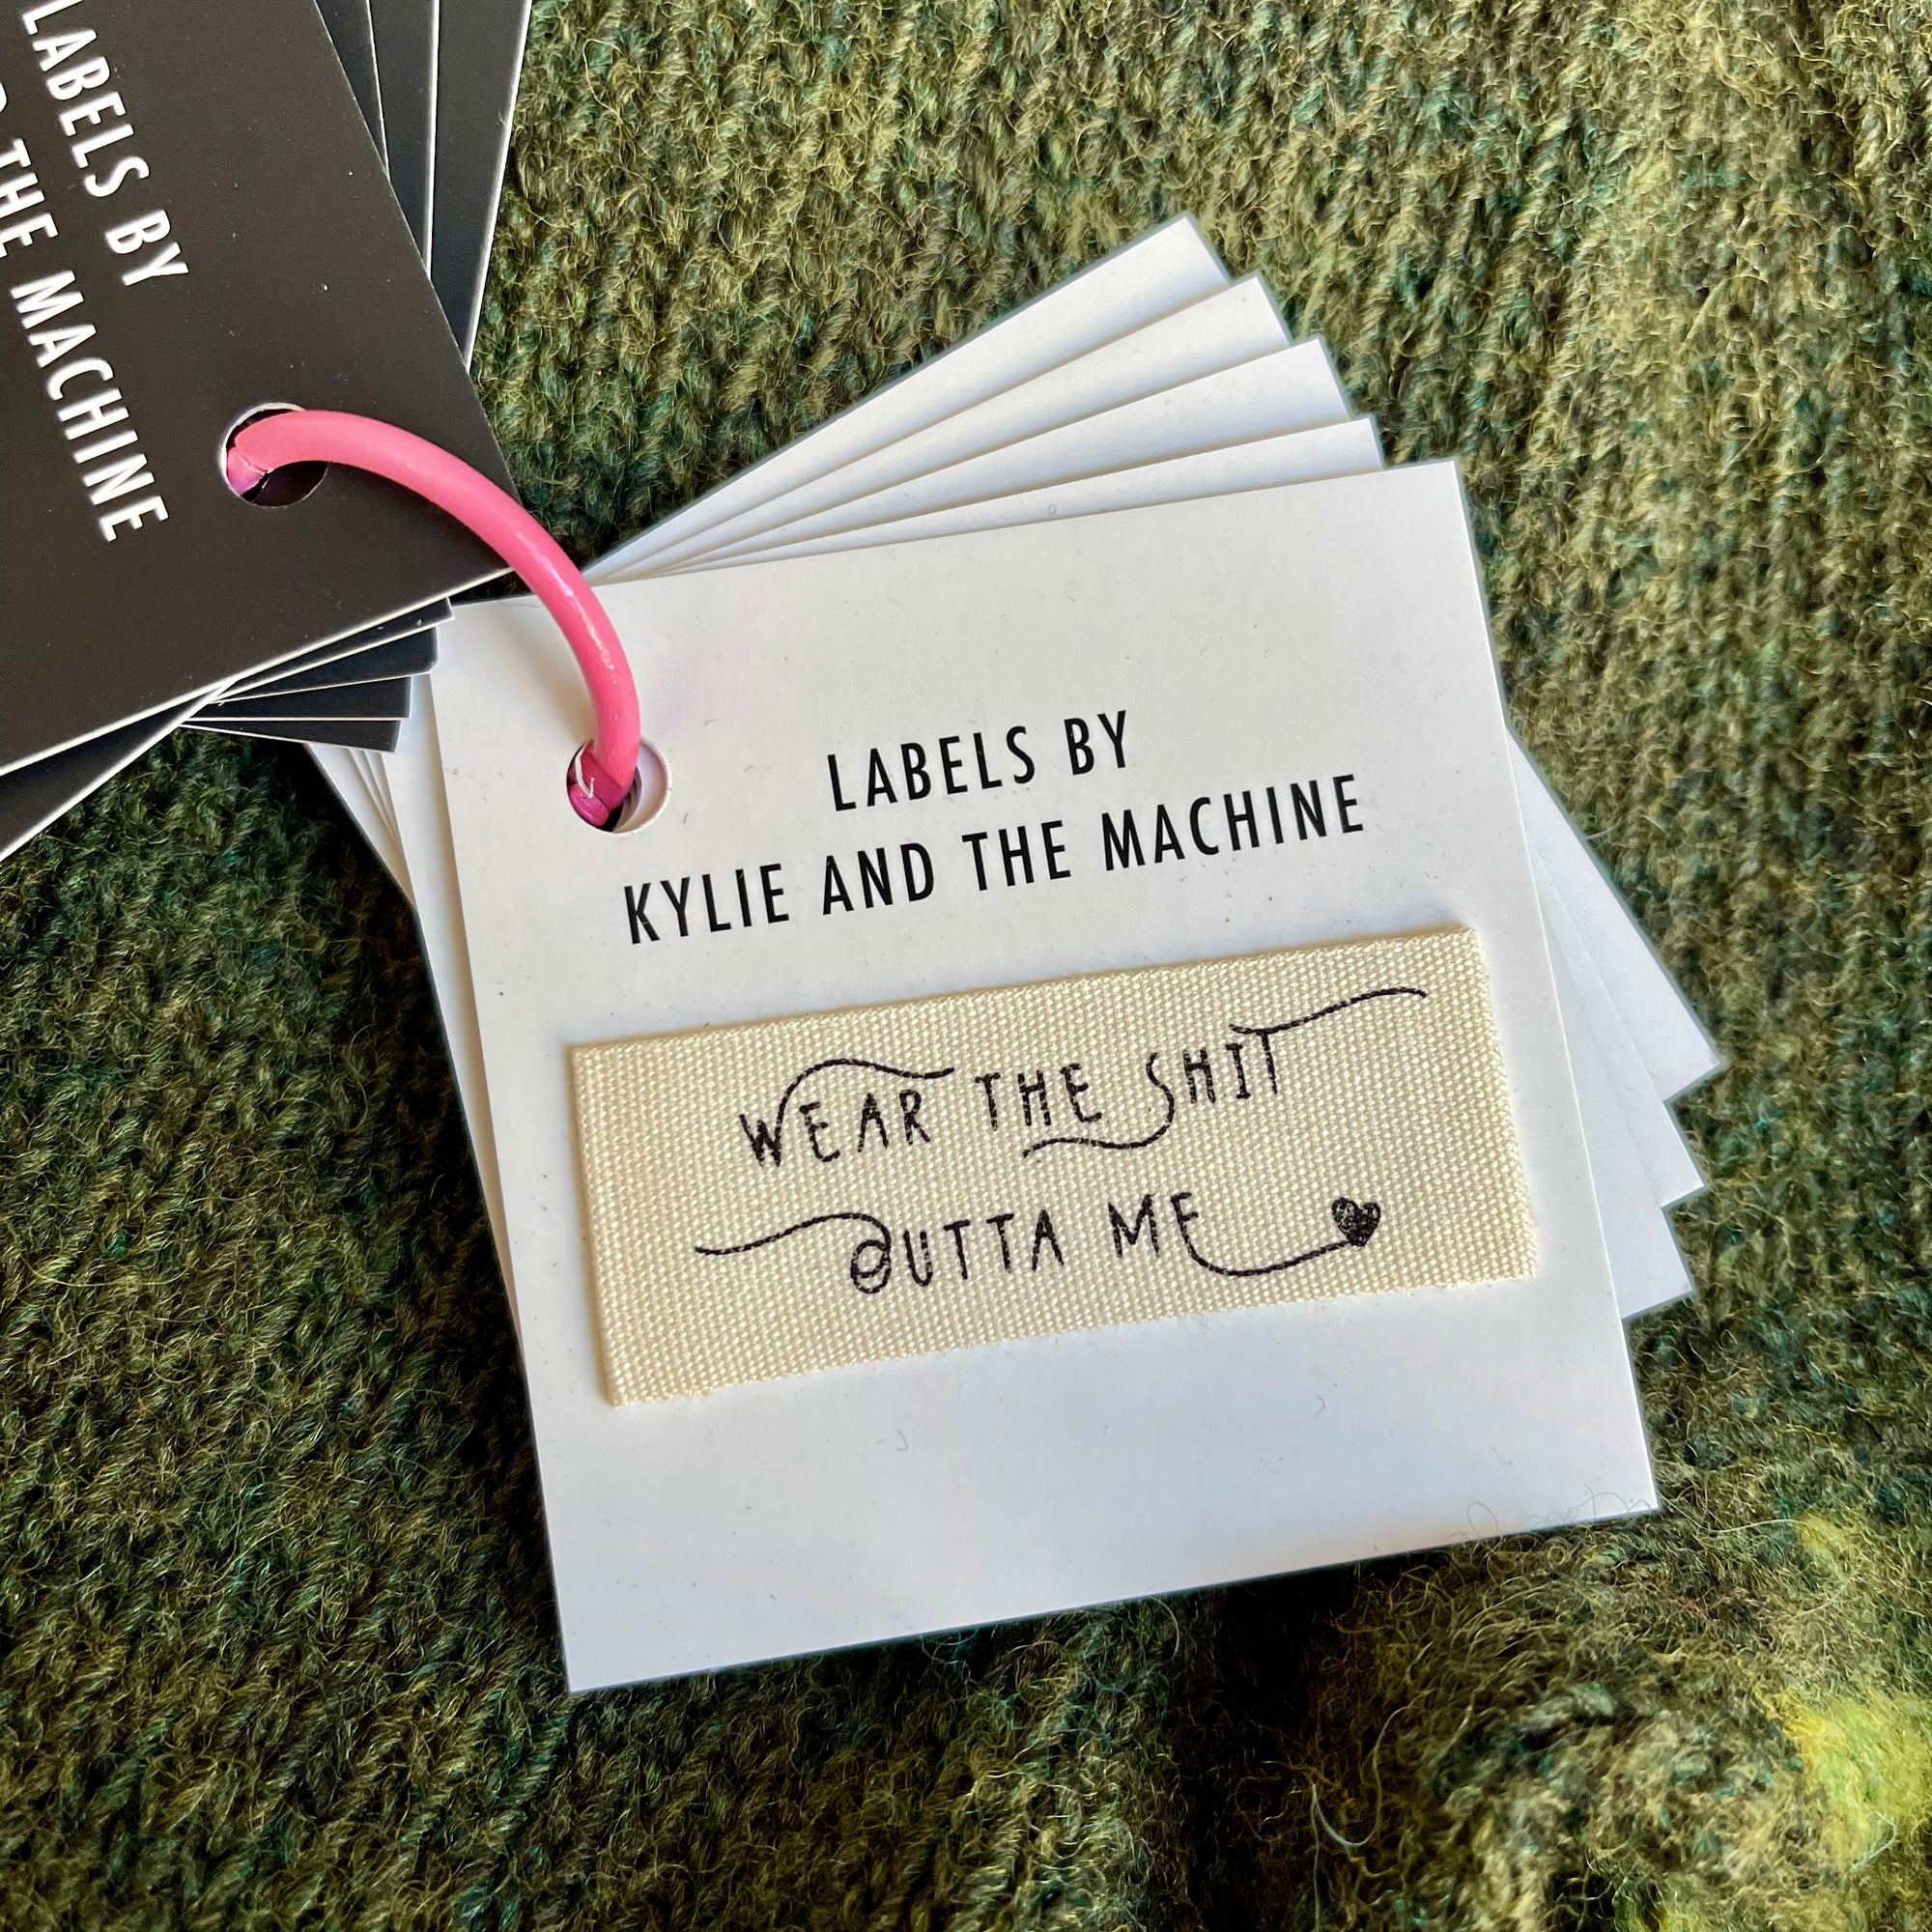 "Wear the Shit Outta Me" Cotton Labels 10 Pack Kylie and the Machine